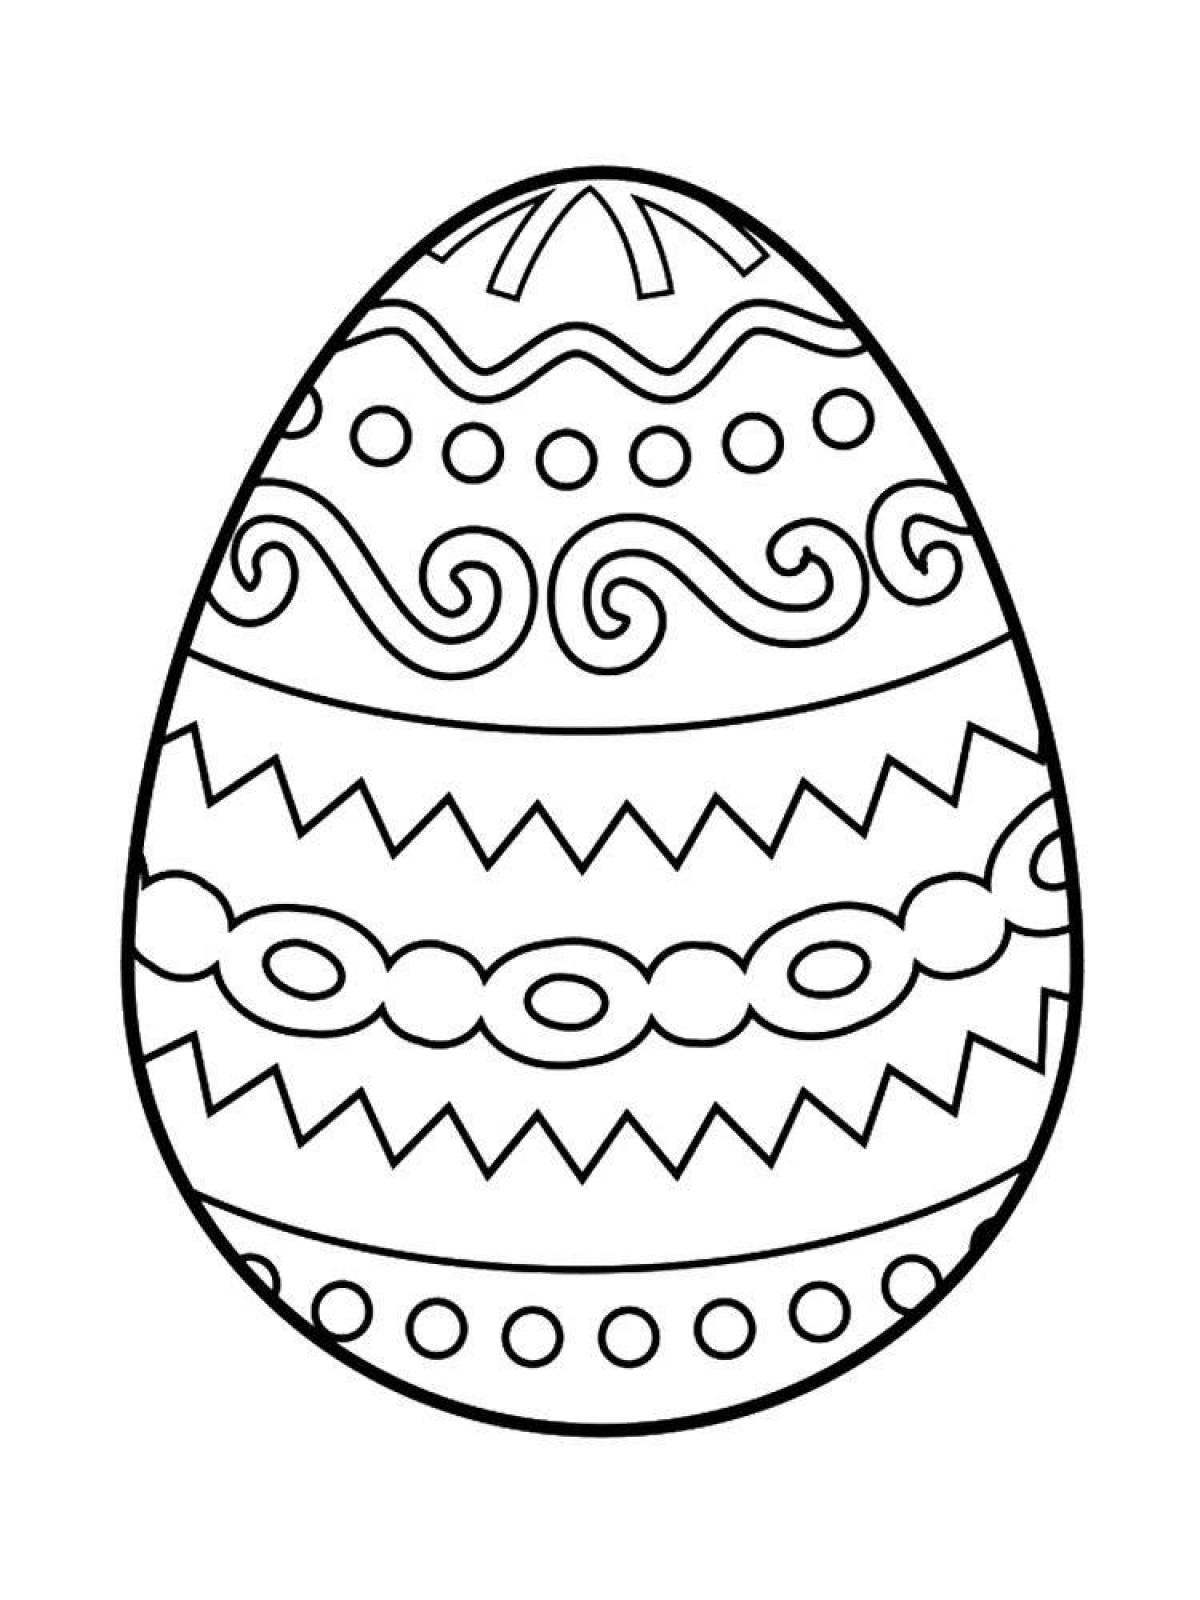 Amazing easter egg coloring page